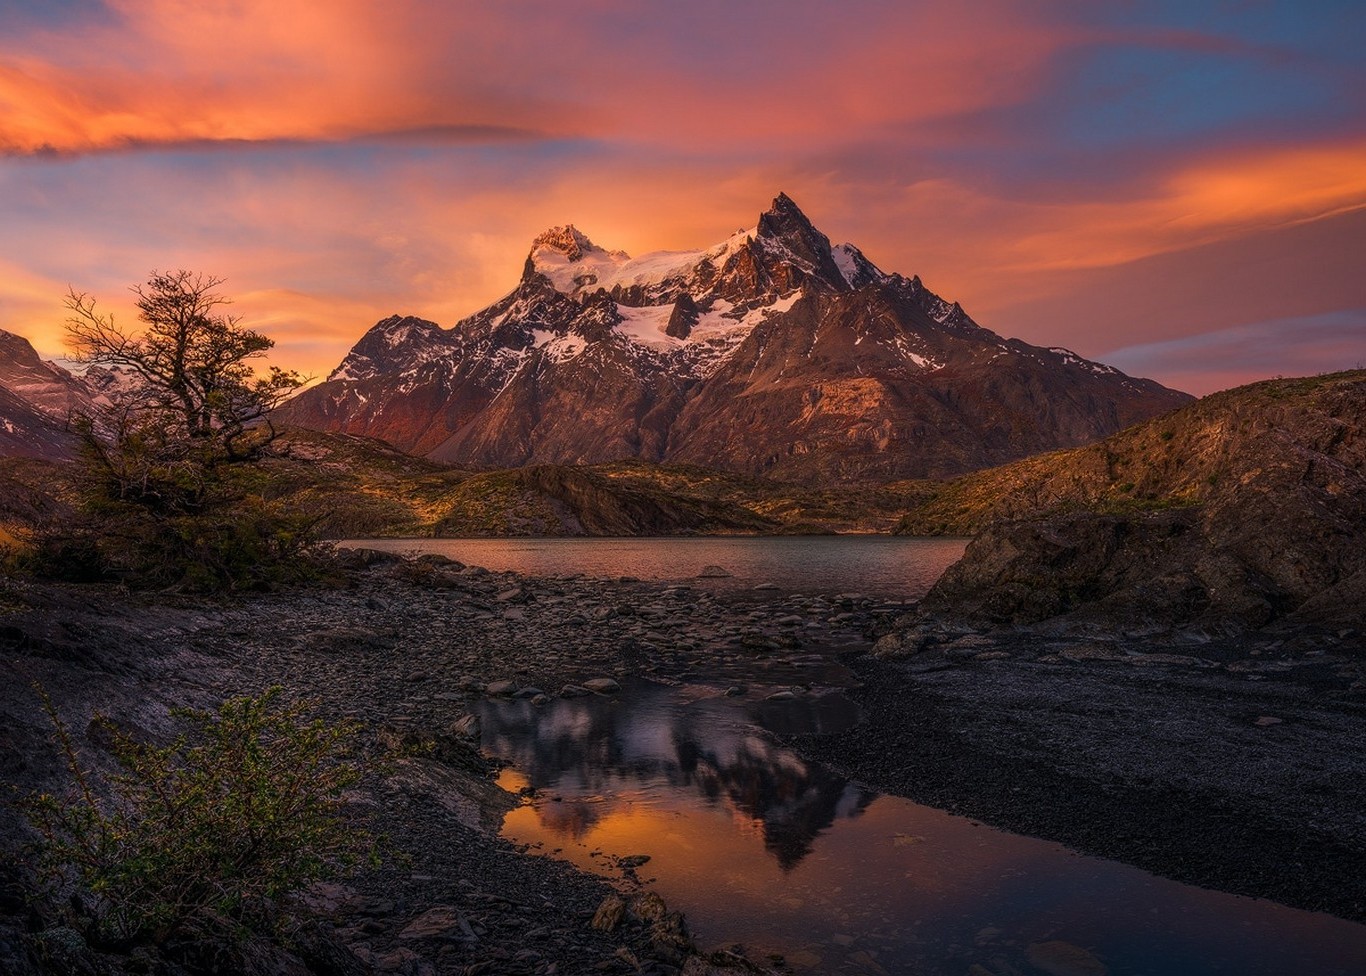 trees, Sunrise, Chile, Mountain, Lake, Torres Del Paine, Patagonia, Snowy Peak, Clouds, Morning, Shrubs, Nature, Landscape Wallpaper